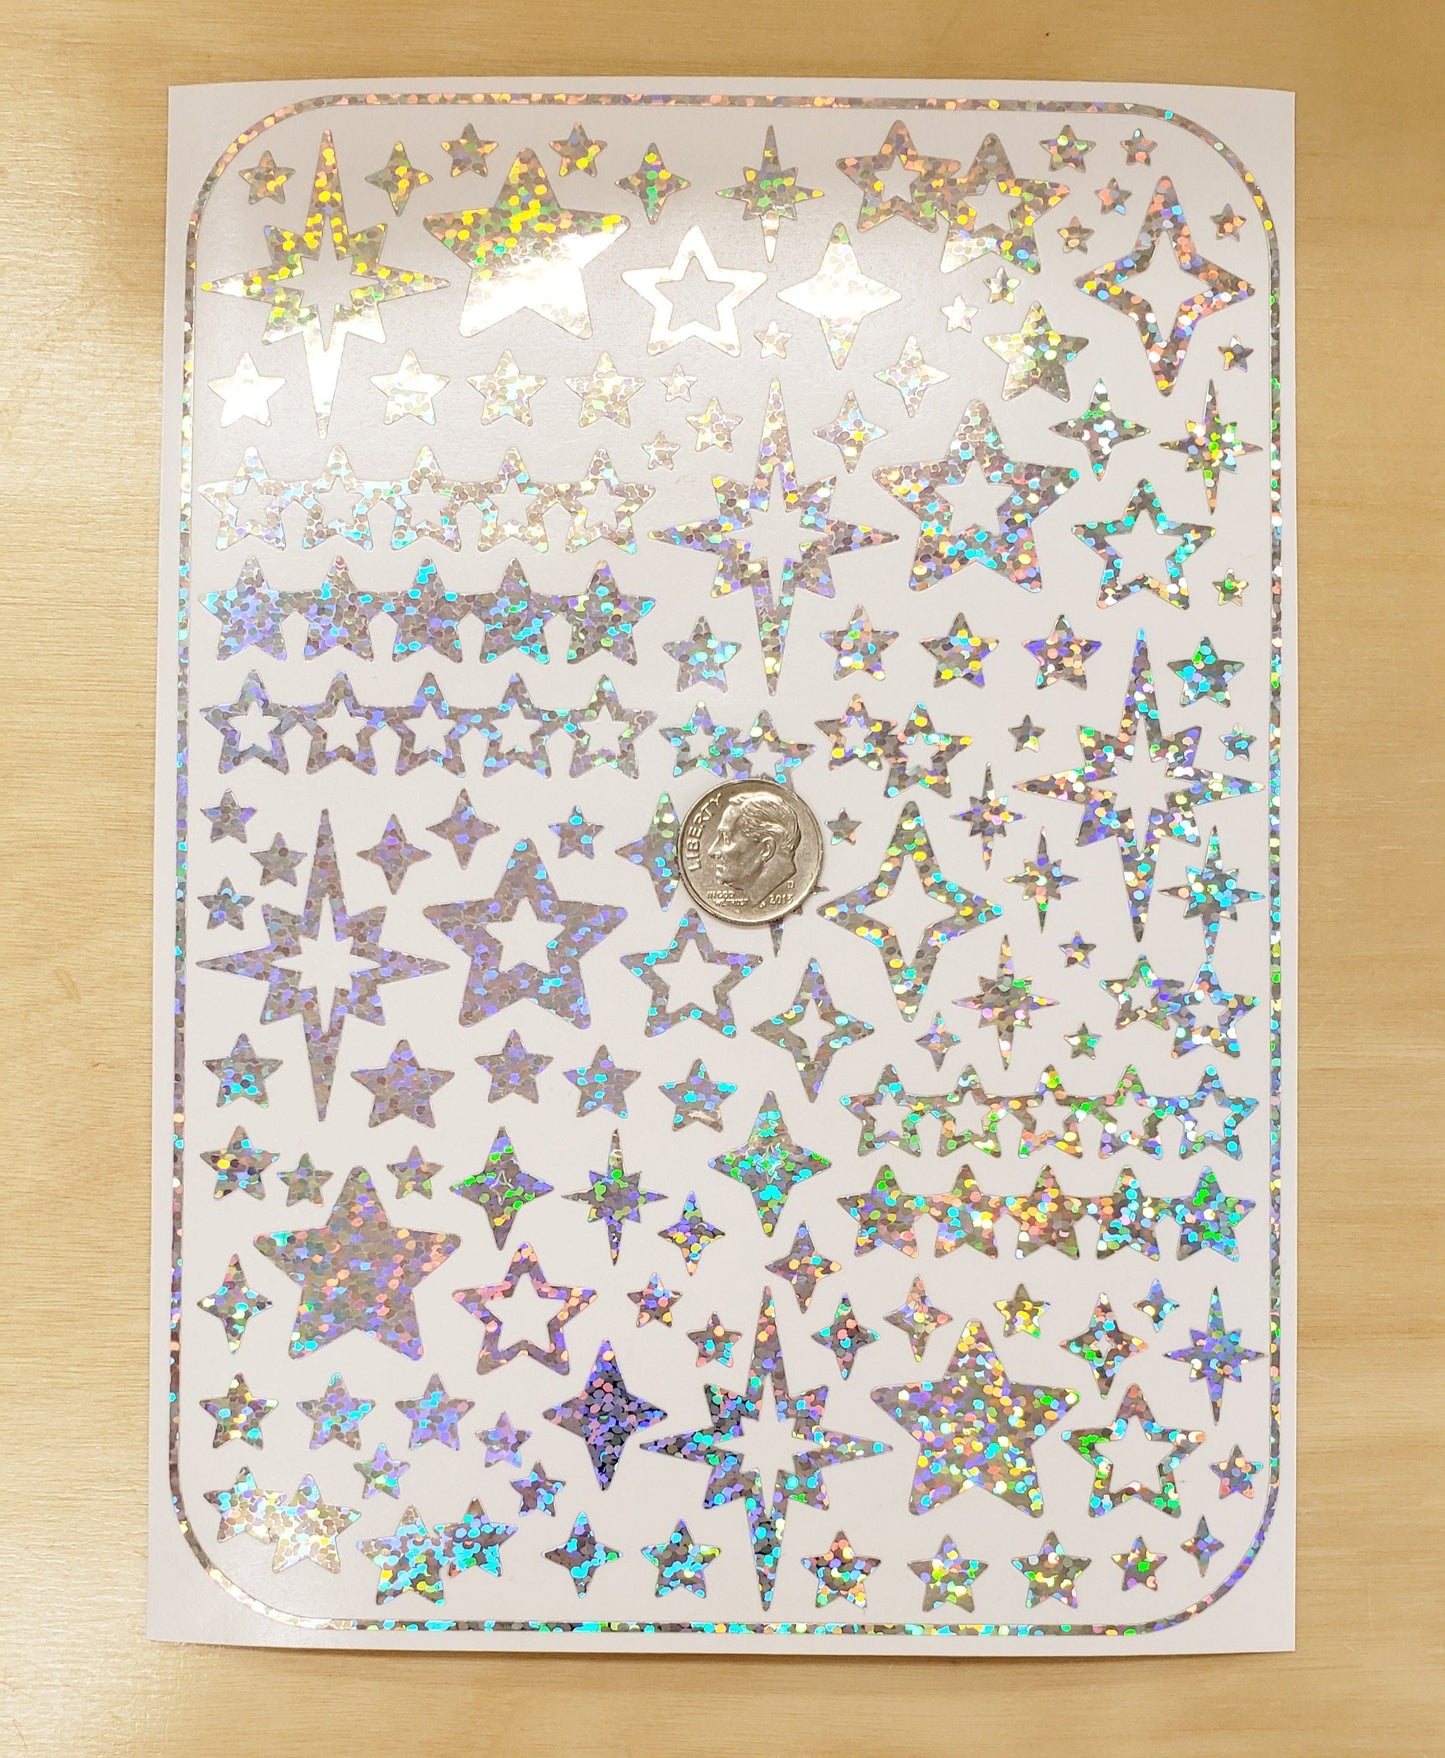 Star Stickers, set of 100 peel and stick kiss cut star stickers for cards, envelopes and journals, glitter or sparkle vinyl star stickers